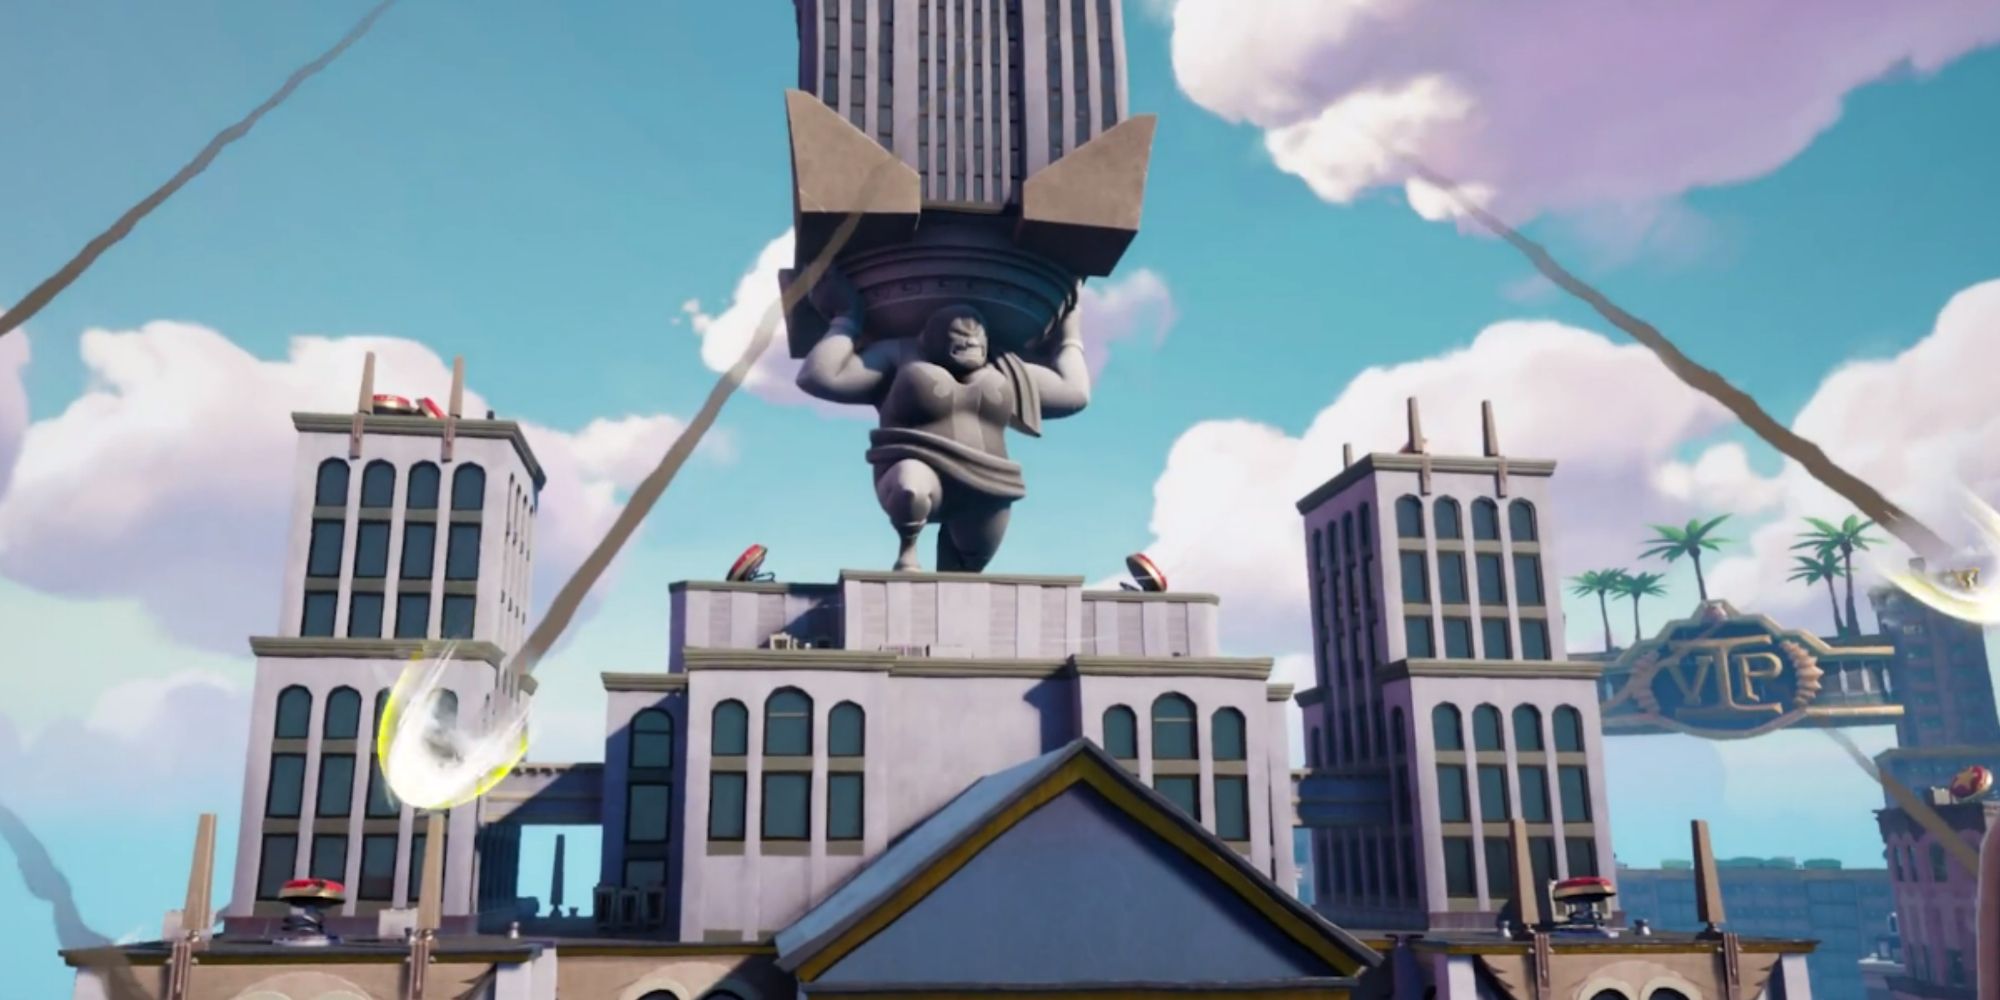 a massive statue and building with character free falling in rumbleverse